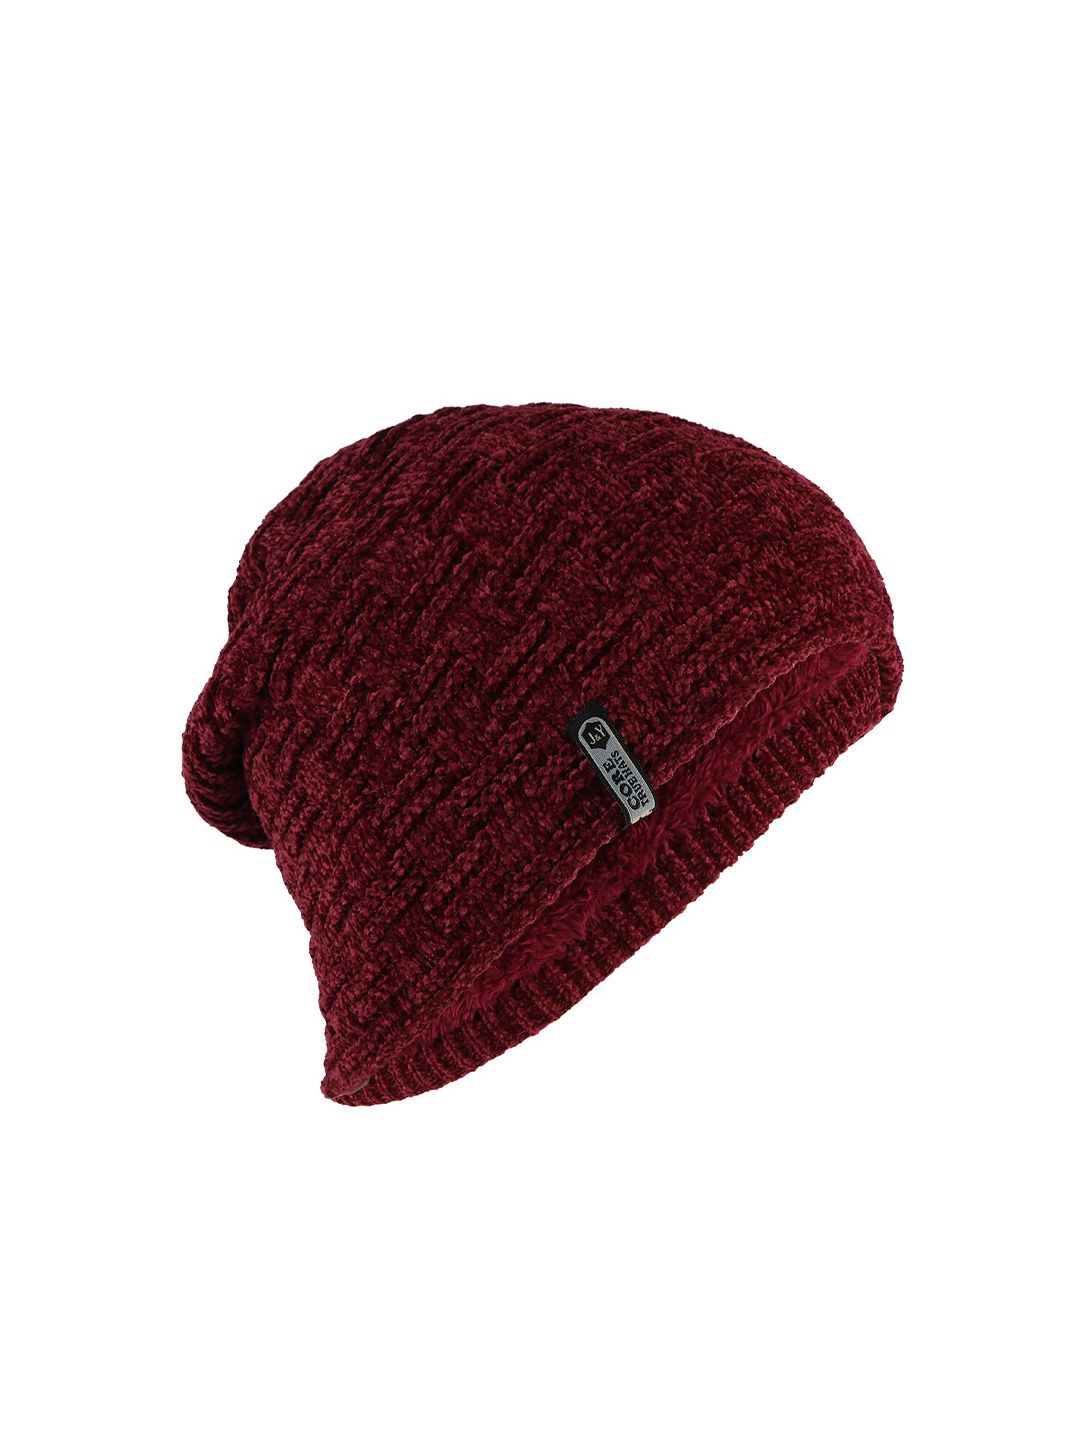 iSWEVEN Unisex Red Beanie Price in India